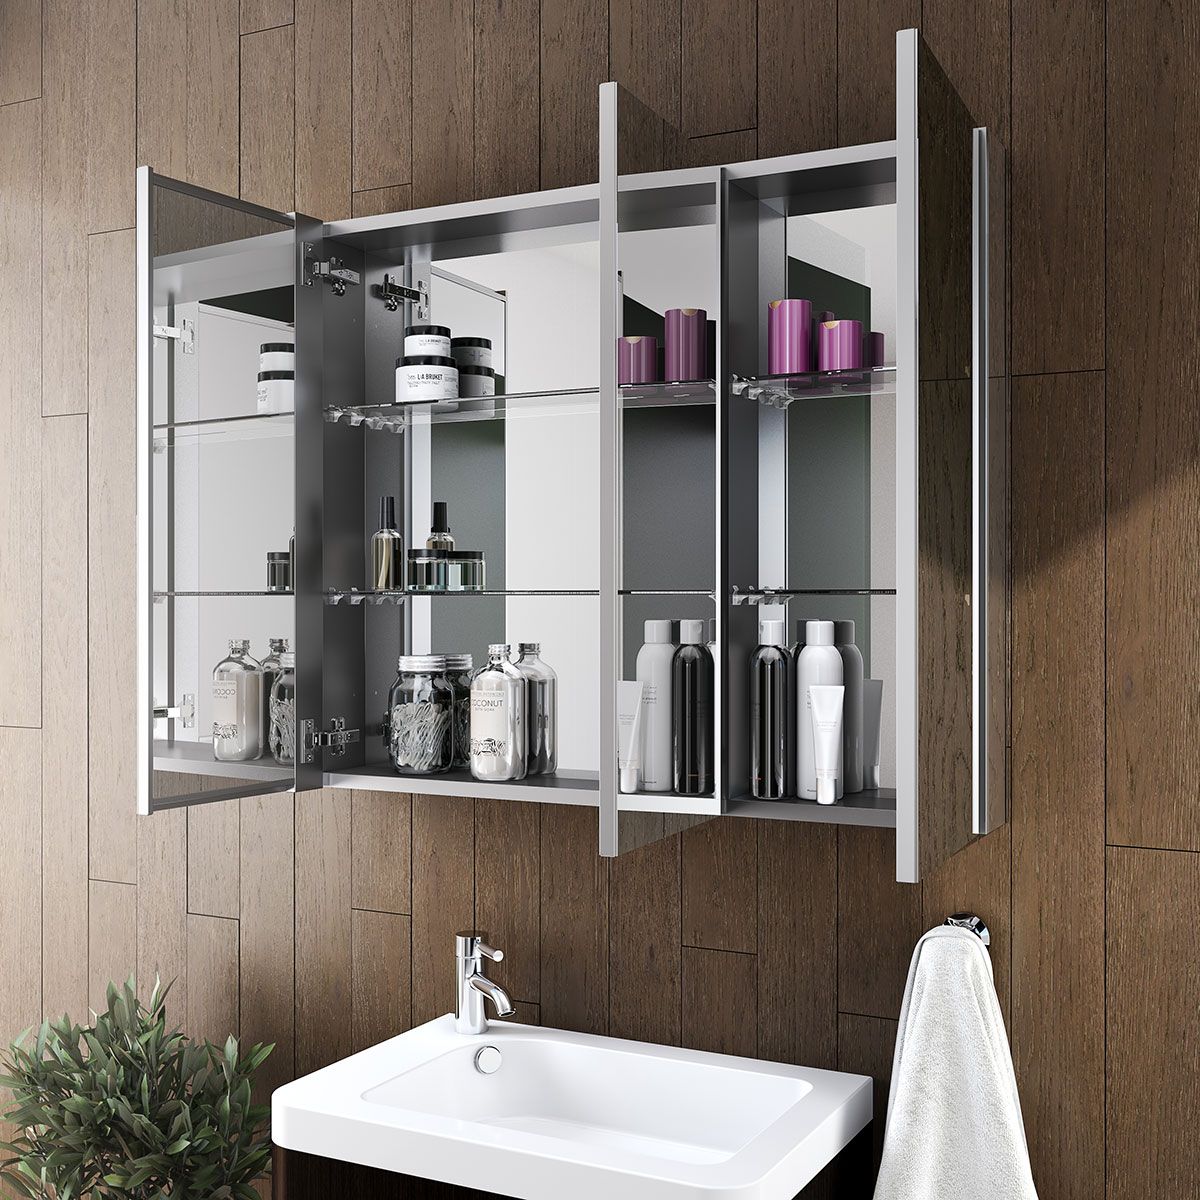 LED Lighted Bathroom Vanity Mirrors & Medicine Cabinets - Innovate Building  Solutions